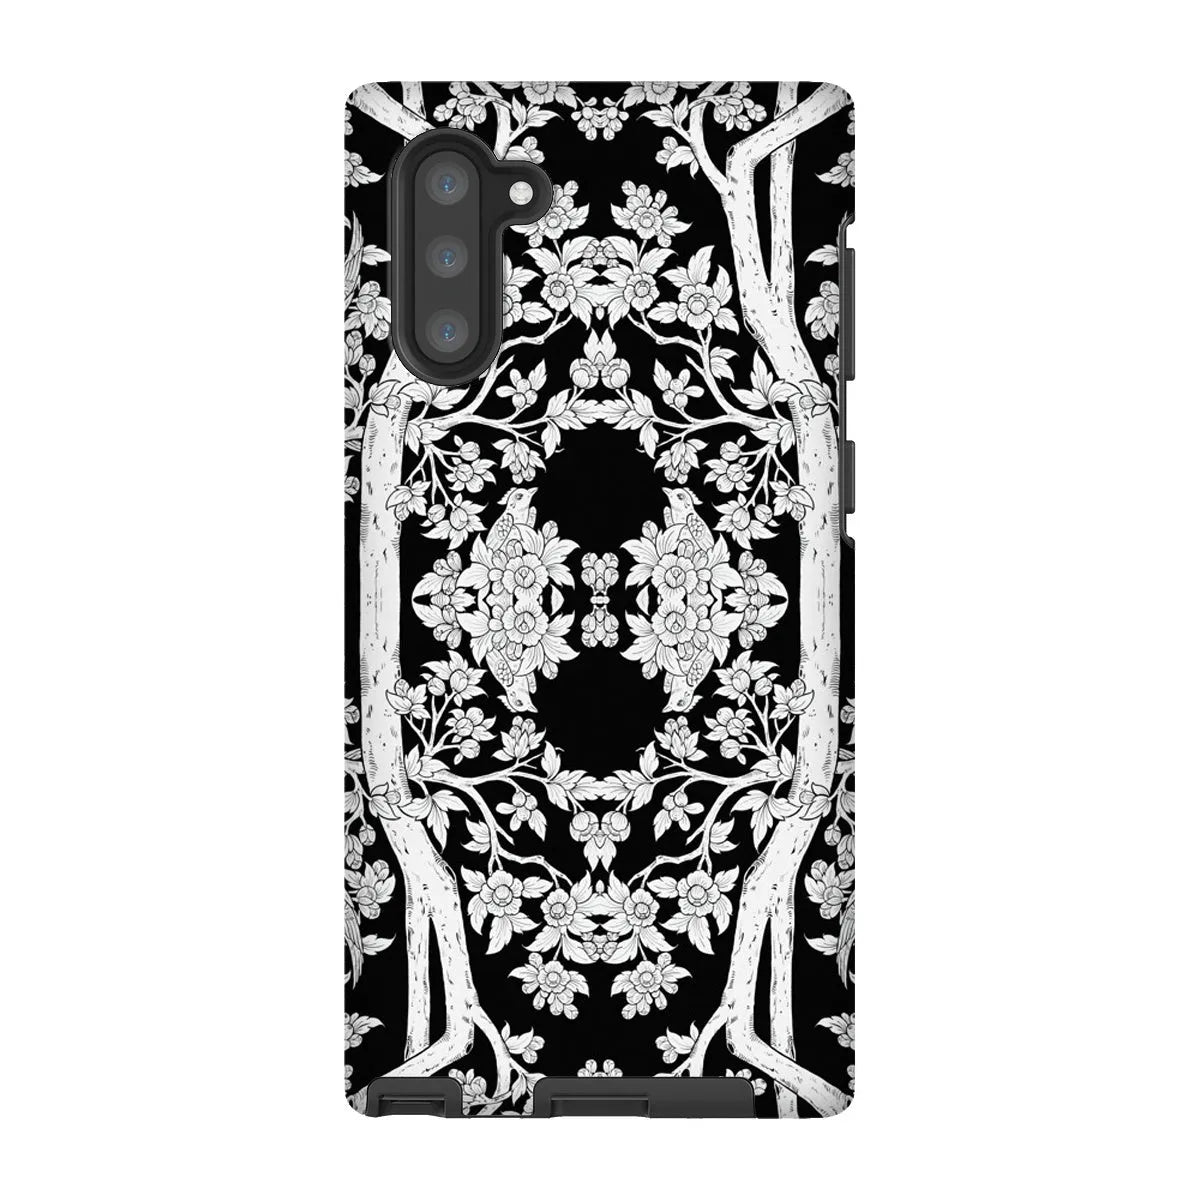 Aviary Black Aesthetic Pattern Art Phone Case - Samsung Galaxy Note 10 / Matte - Mobile Phone Cases - Aesthetic Art